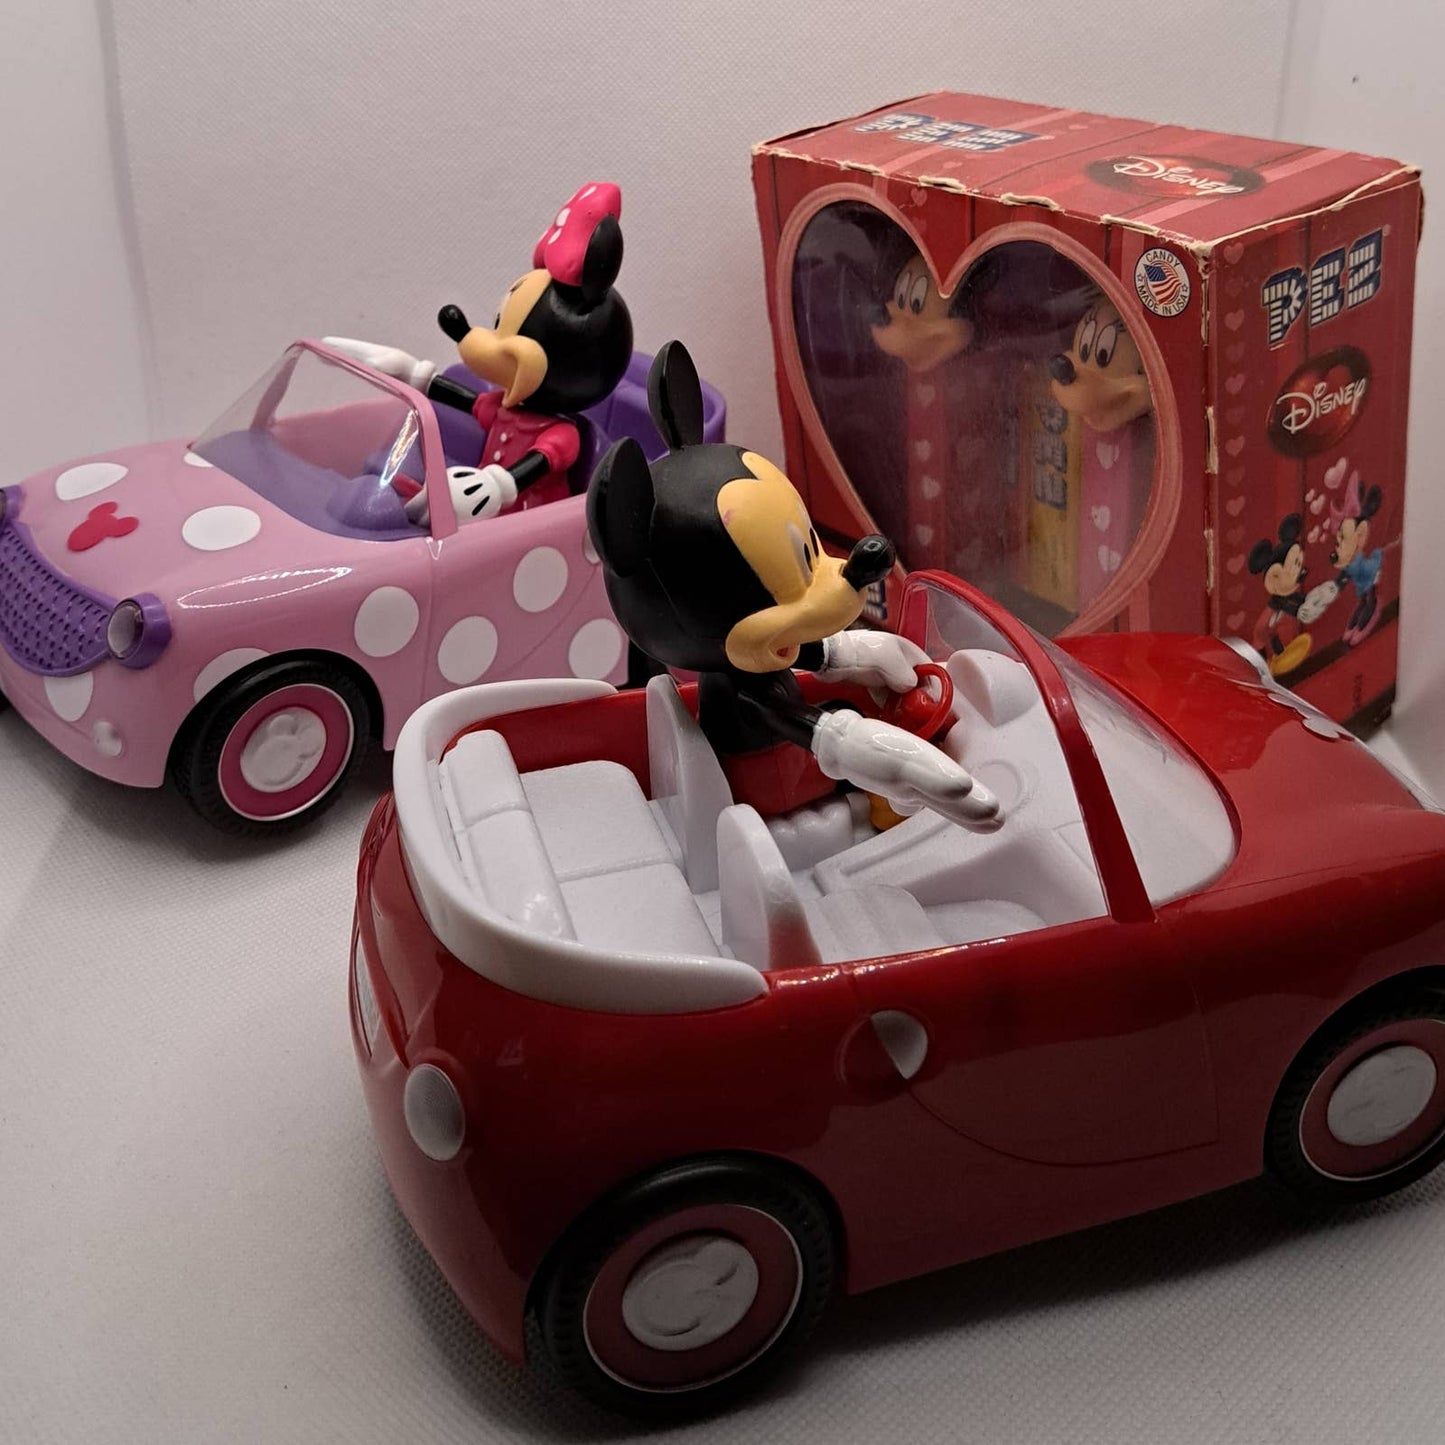 Vintage Minnie and Mickey - Battery Operated Cars and PEEZ